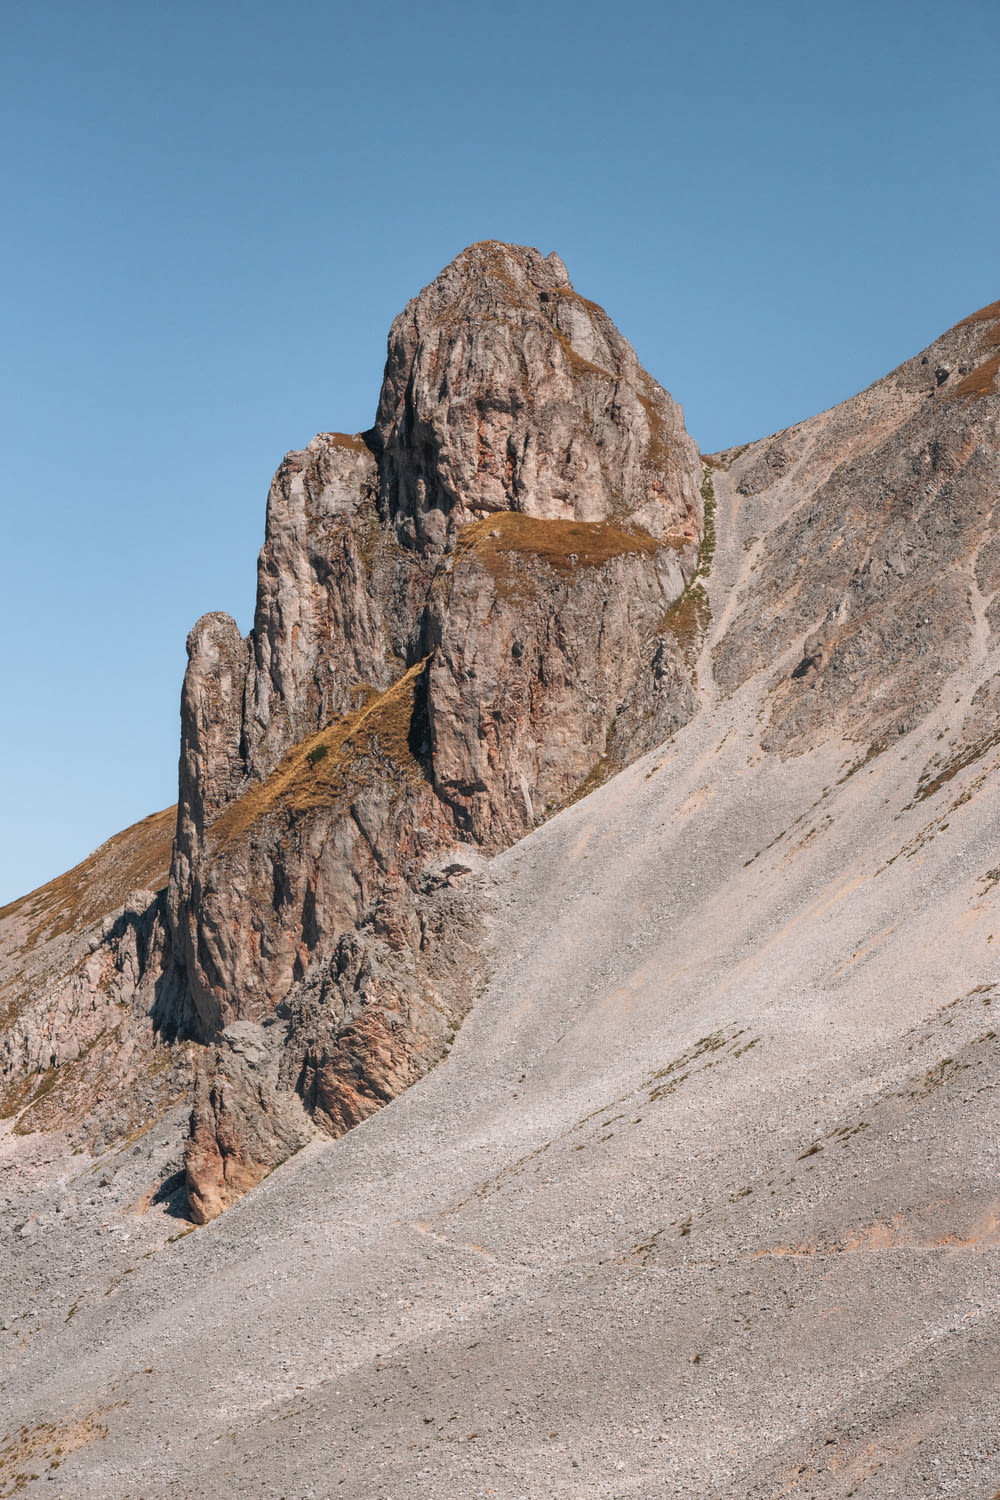 a mountain with a very tall rock formation